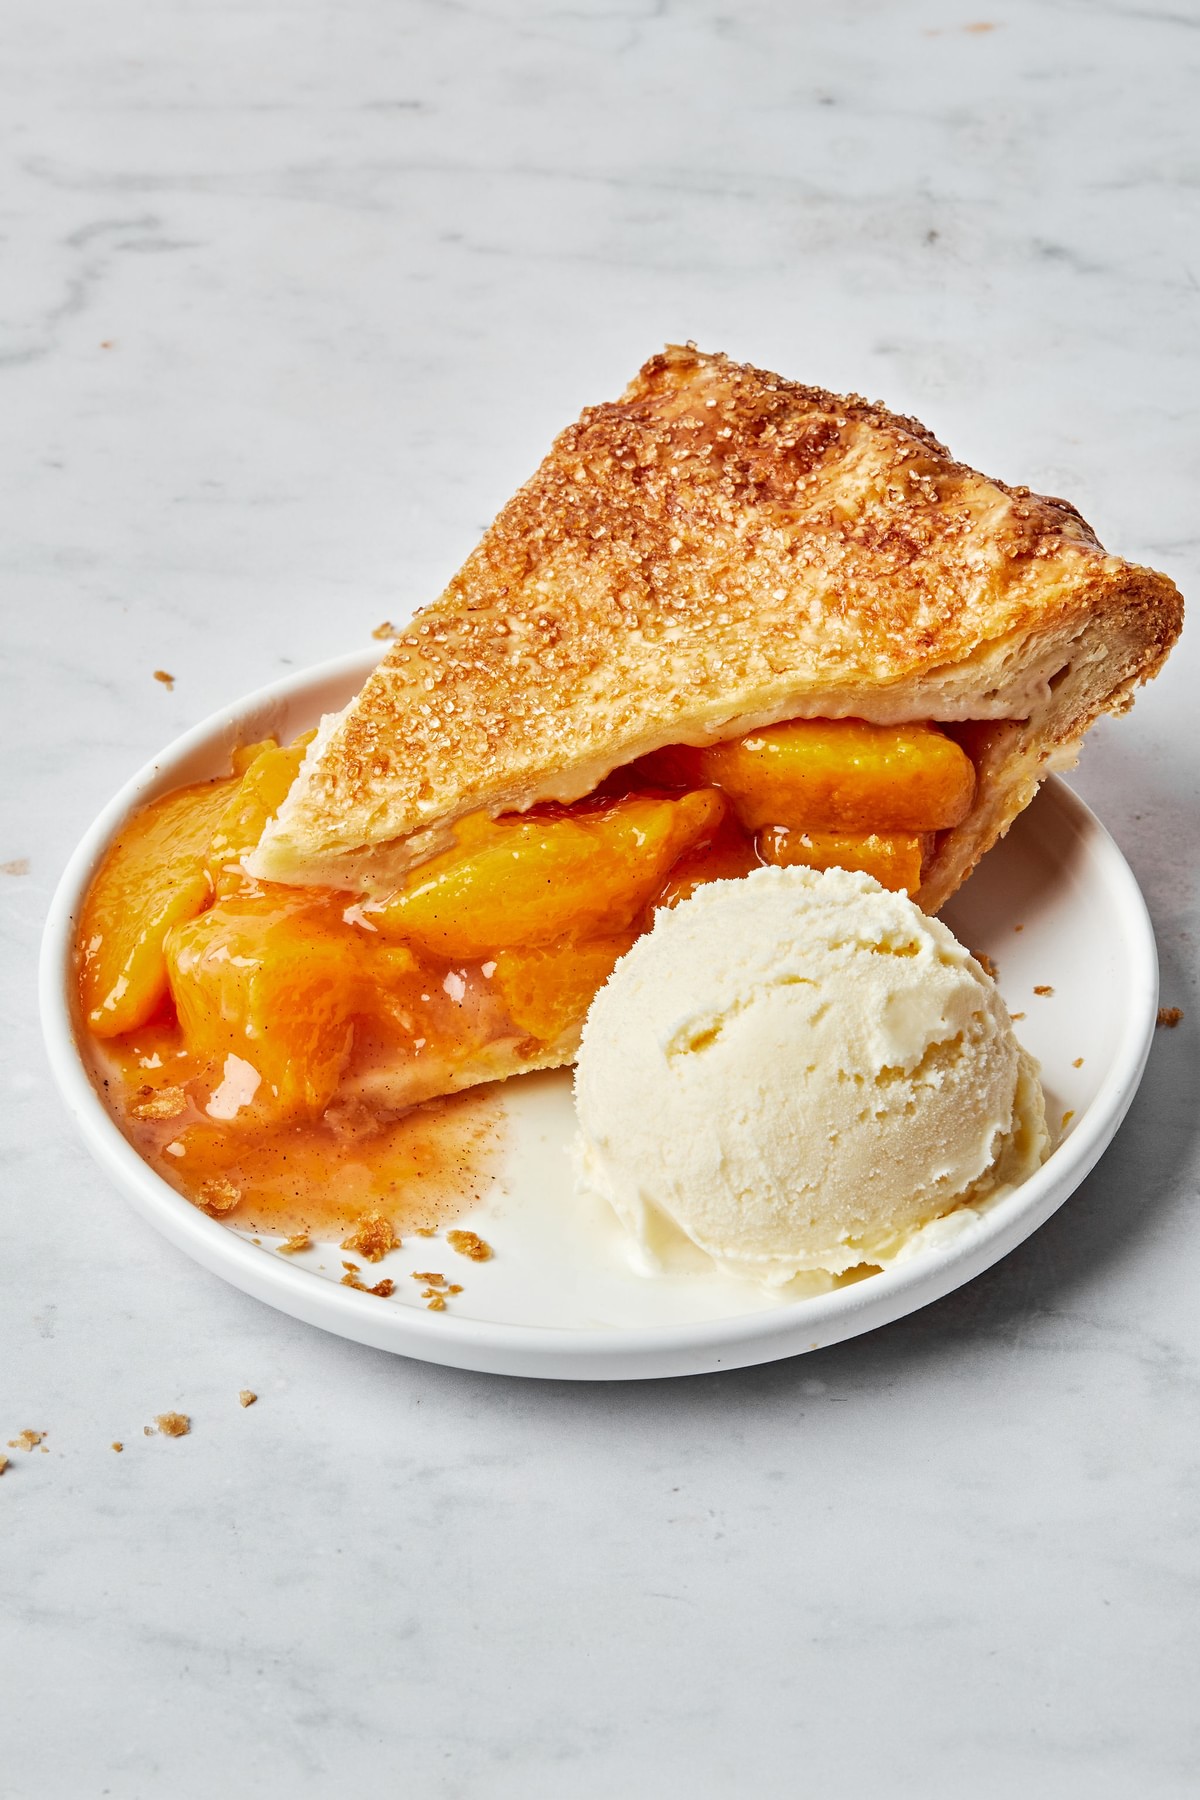 a slice of homemade peach pie with homemade pie crust on a plate with a scoop of vanilla ice cream